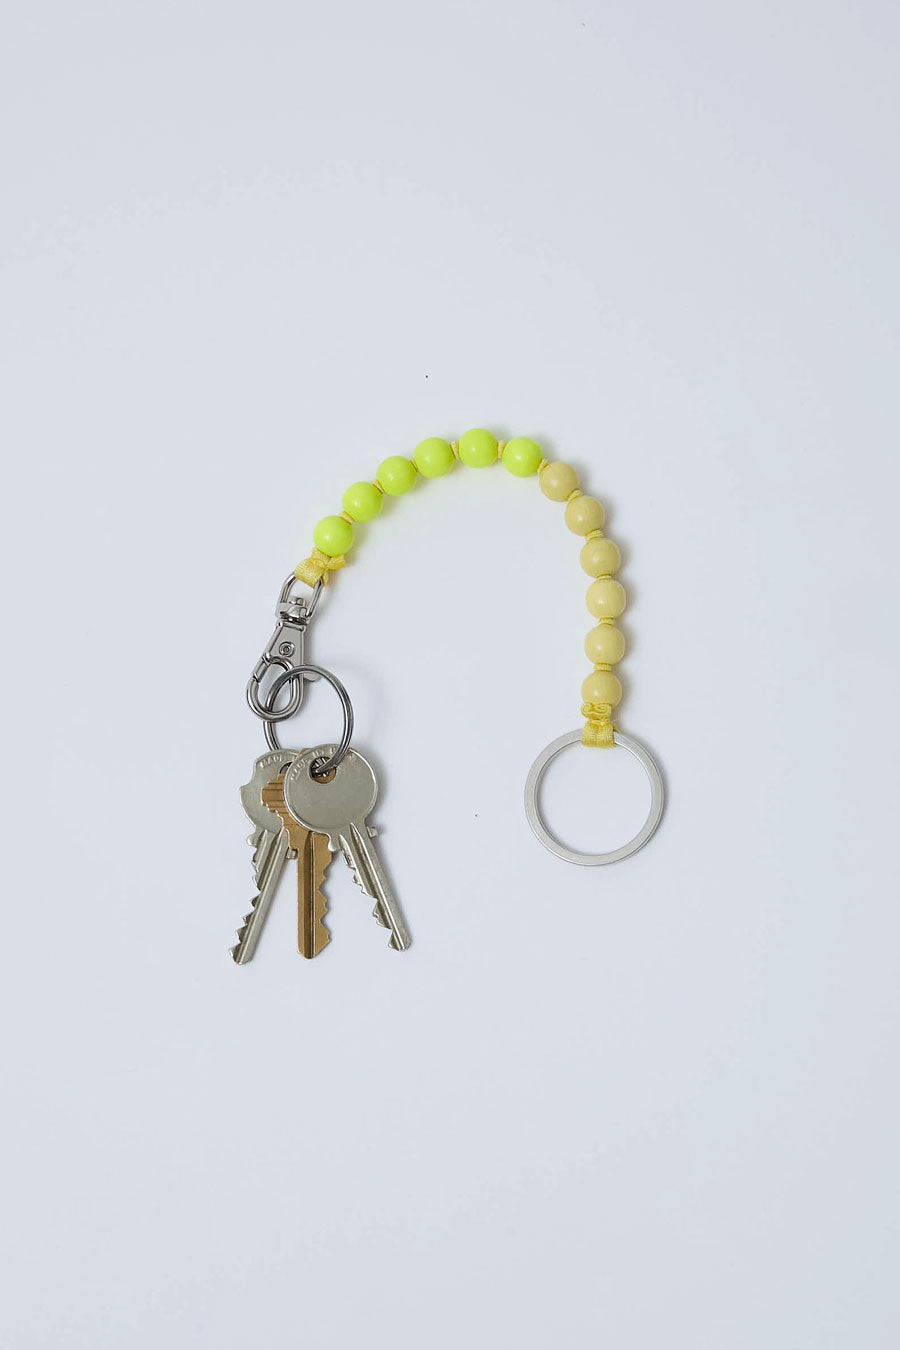 Ina Seifart Perlen Short Keyholder in Pastel Yellow and Neon Yellow Mix